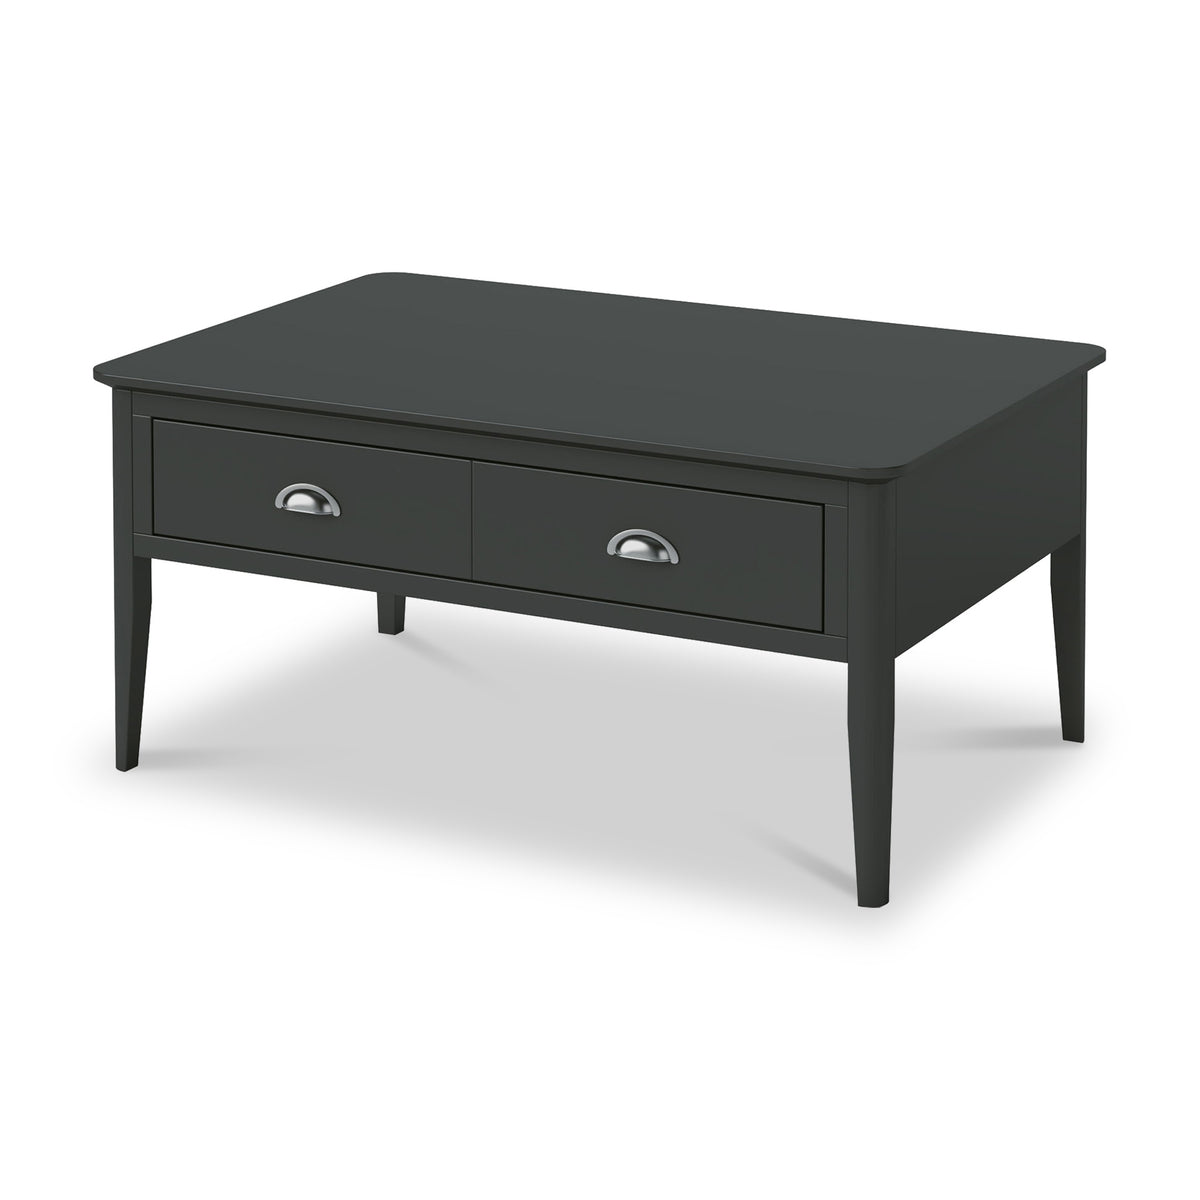 Dumbarton Charcoal Coffee Table from Roseland Furniture